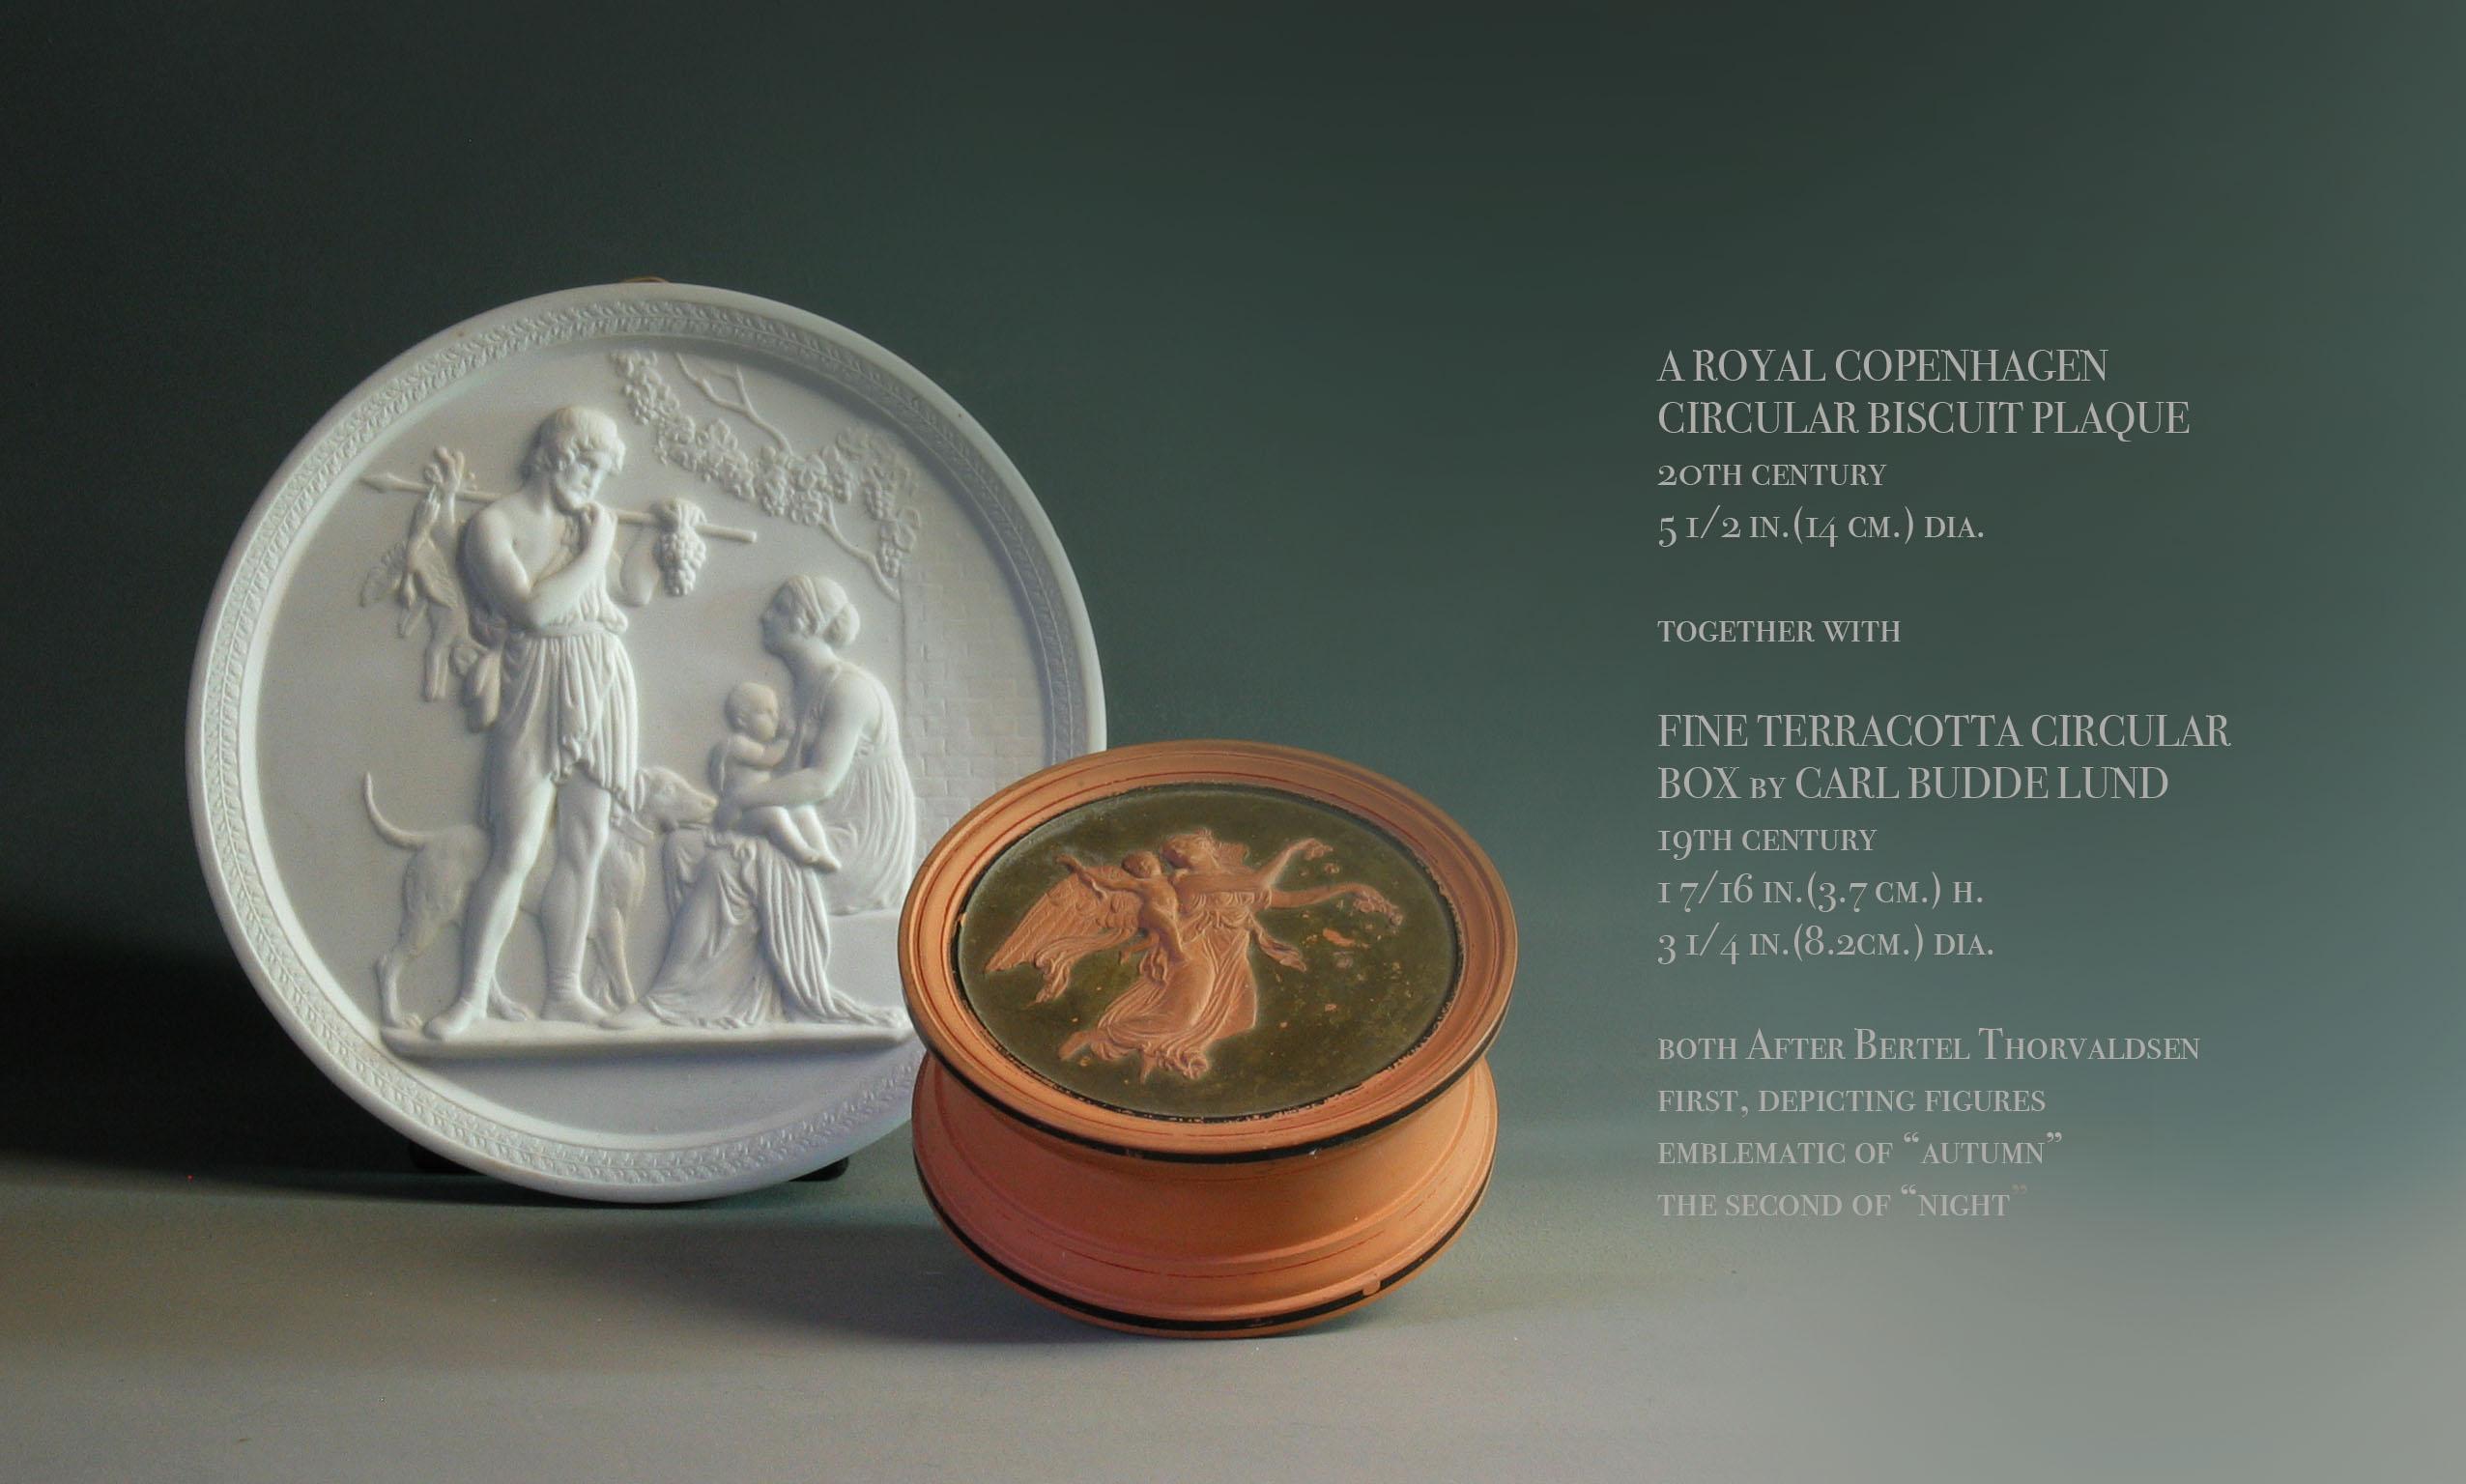 
A Royal Copenhagen
Circular biscuit plaque
20th century
Measure: 5 1/2 In.(14 Cm.) diameter
Together With,
Fine terracotta circular box by Carl Budde Lund
19th century
Measures: 1 7/16 In.(3.7 Cm.) height.
3 1/4 In.(8.2cm.) diameter.
Both